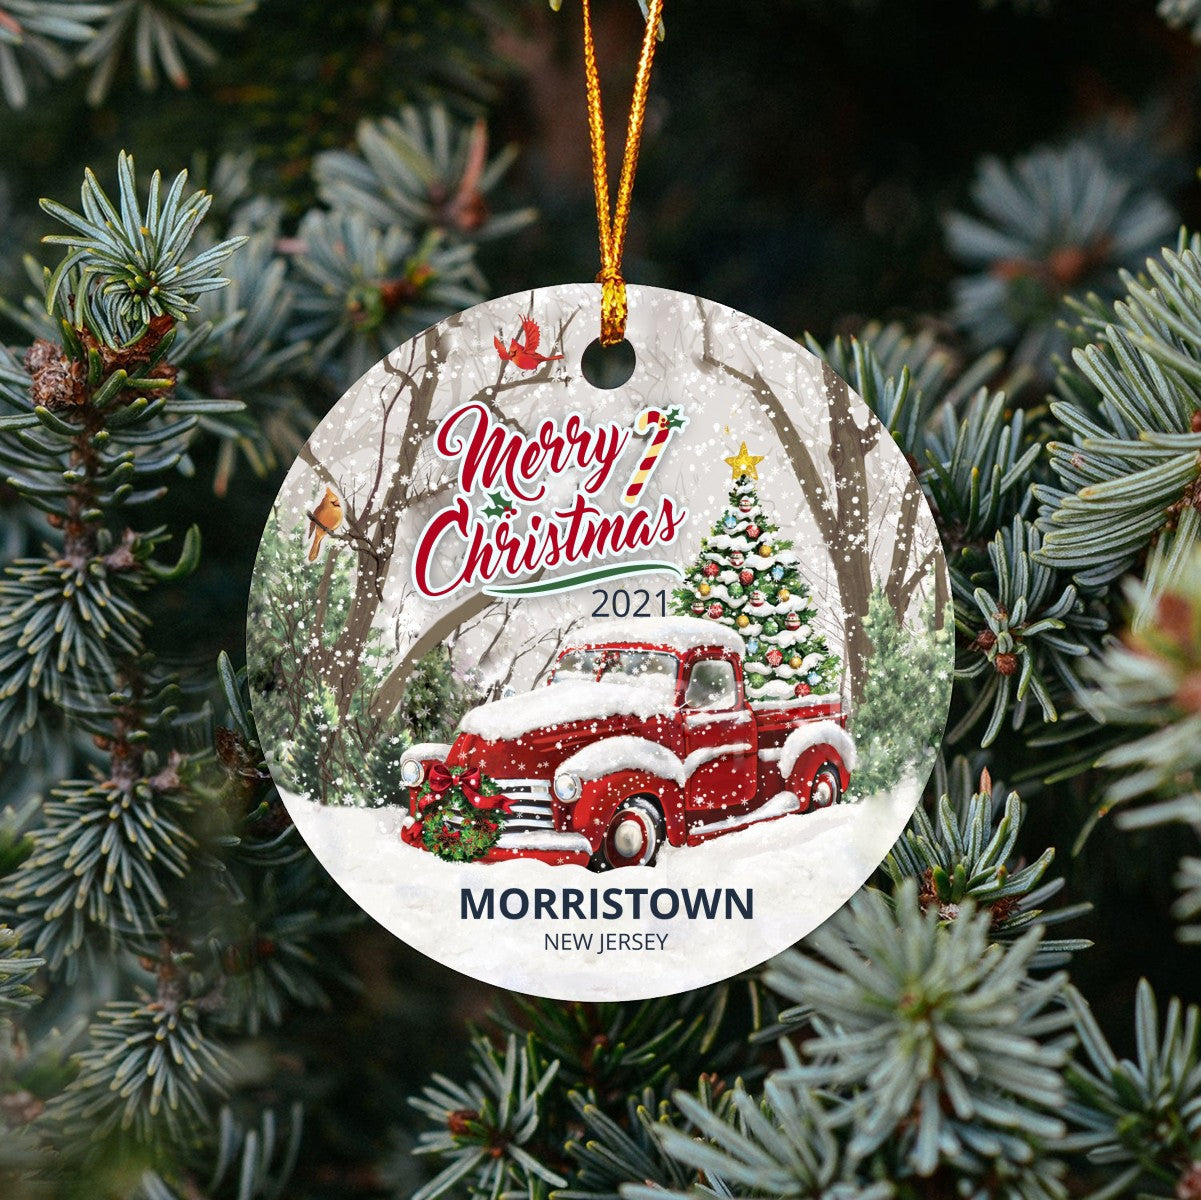 Christmas Tree Ornaments Morristown - Ornament With Name City, State Morristown New Jersey NJ Ornament - Red Truck Xmas Ornaments 3'' Plastic Gift For Family, Friend And Housewarming